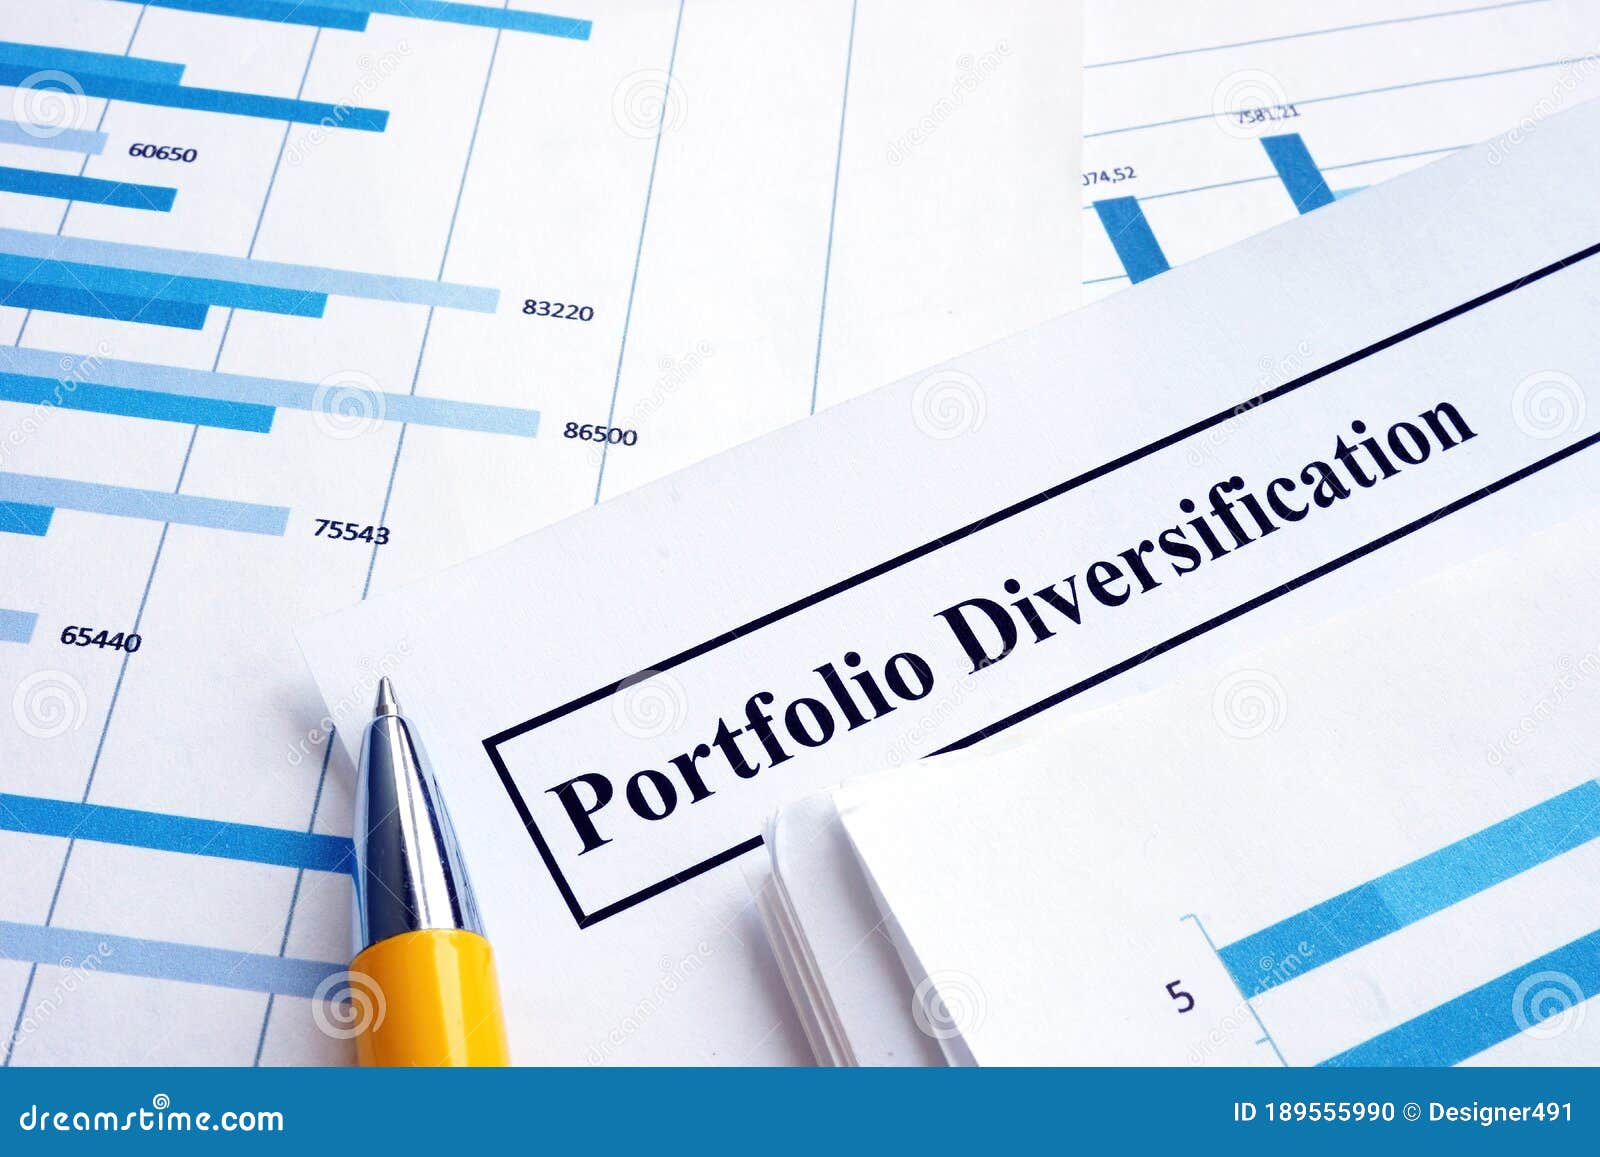 papers about investment portfolio diversification.